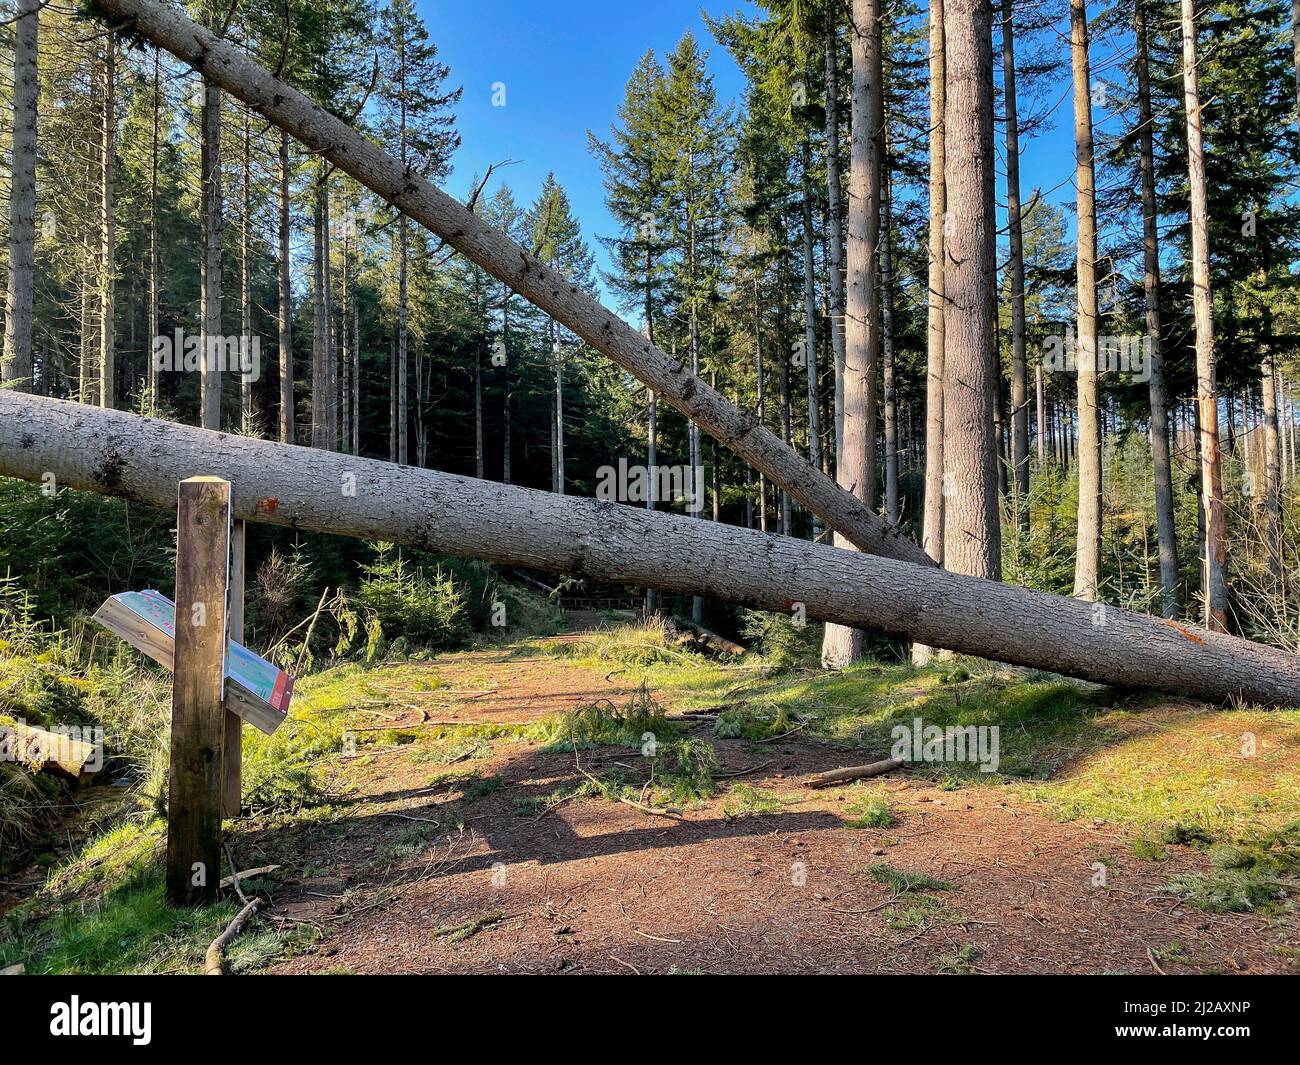 Storm damage resulting in many tree being blown over in 90mph winds. Kielder Forest in Northumberland, northeast England. Stock Photo